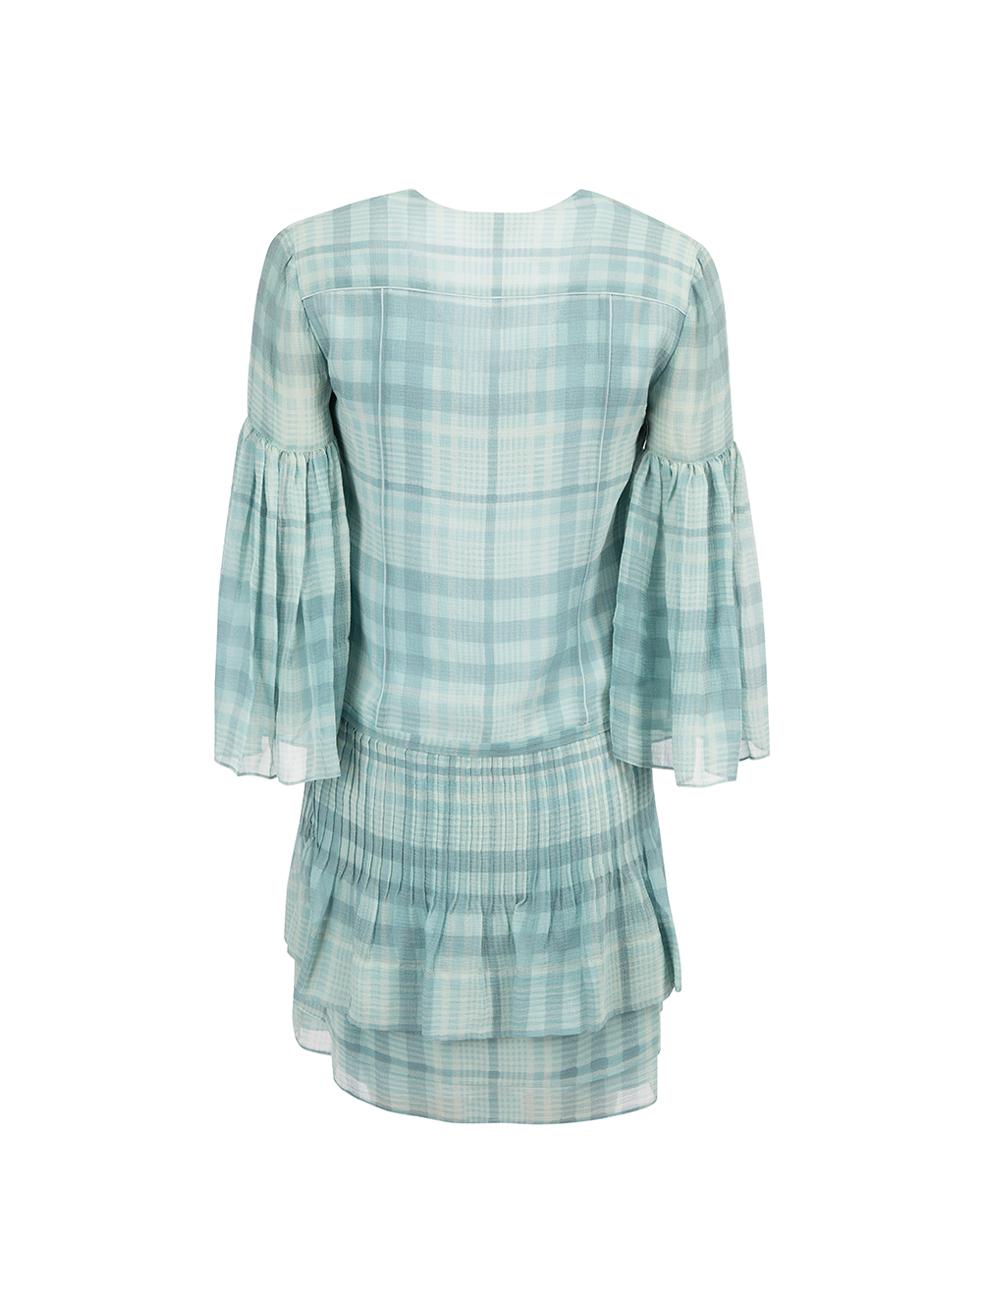 Burberry Women's Blue Check V-Neck Mini Dress In Excellent Condition For Sale In London, GB